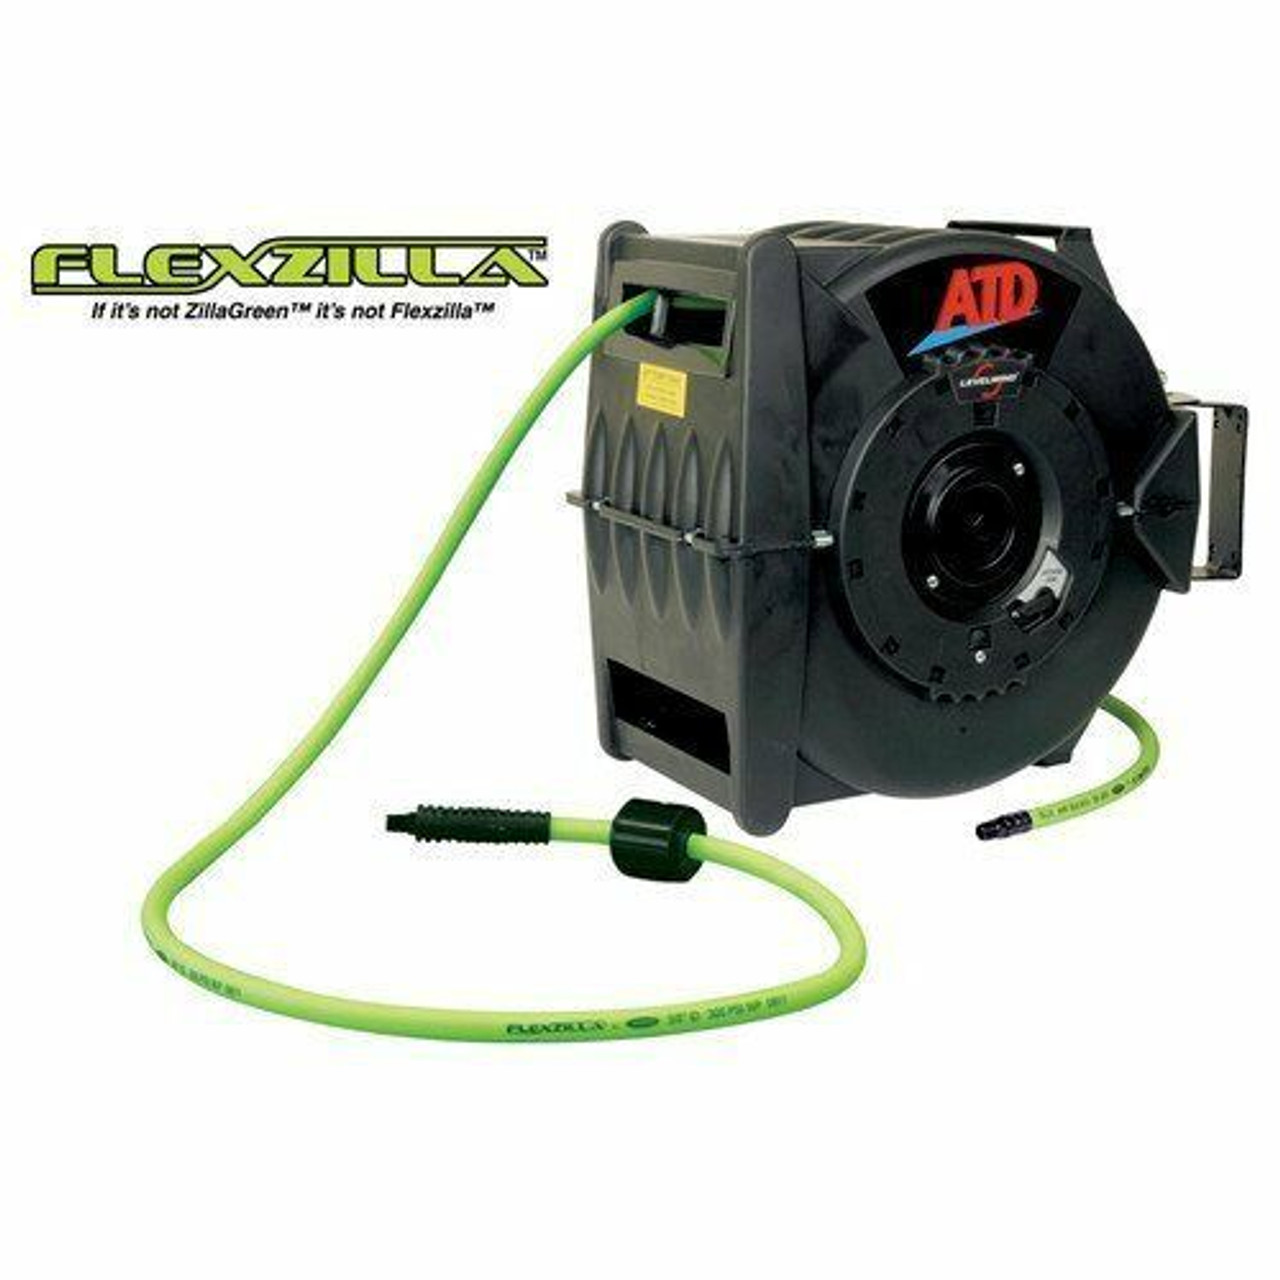 ATD Tools Levelwind? Retractable Air Hose Reel with Flexzilla? Hose